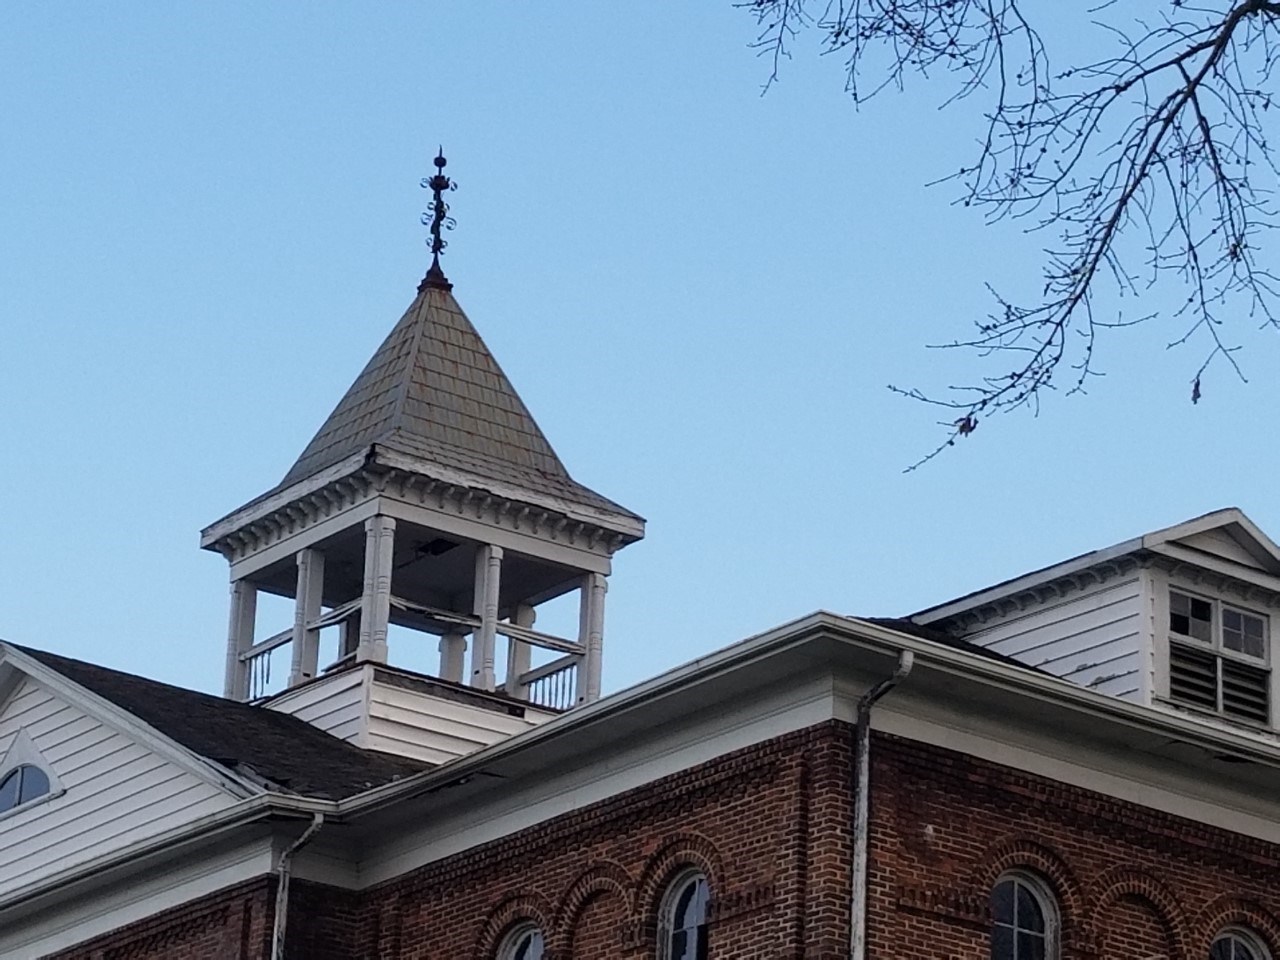 Side view of the original bell tower of Thrasher Hall.